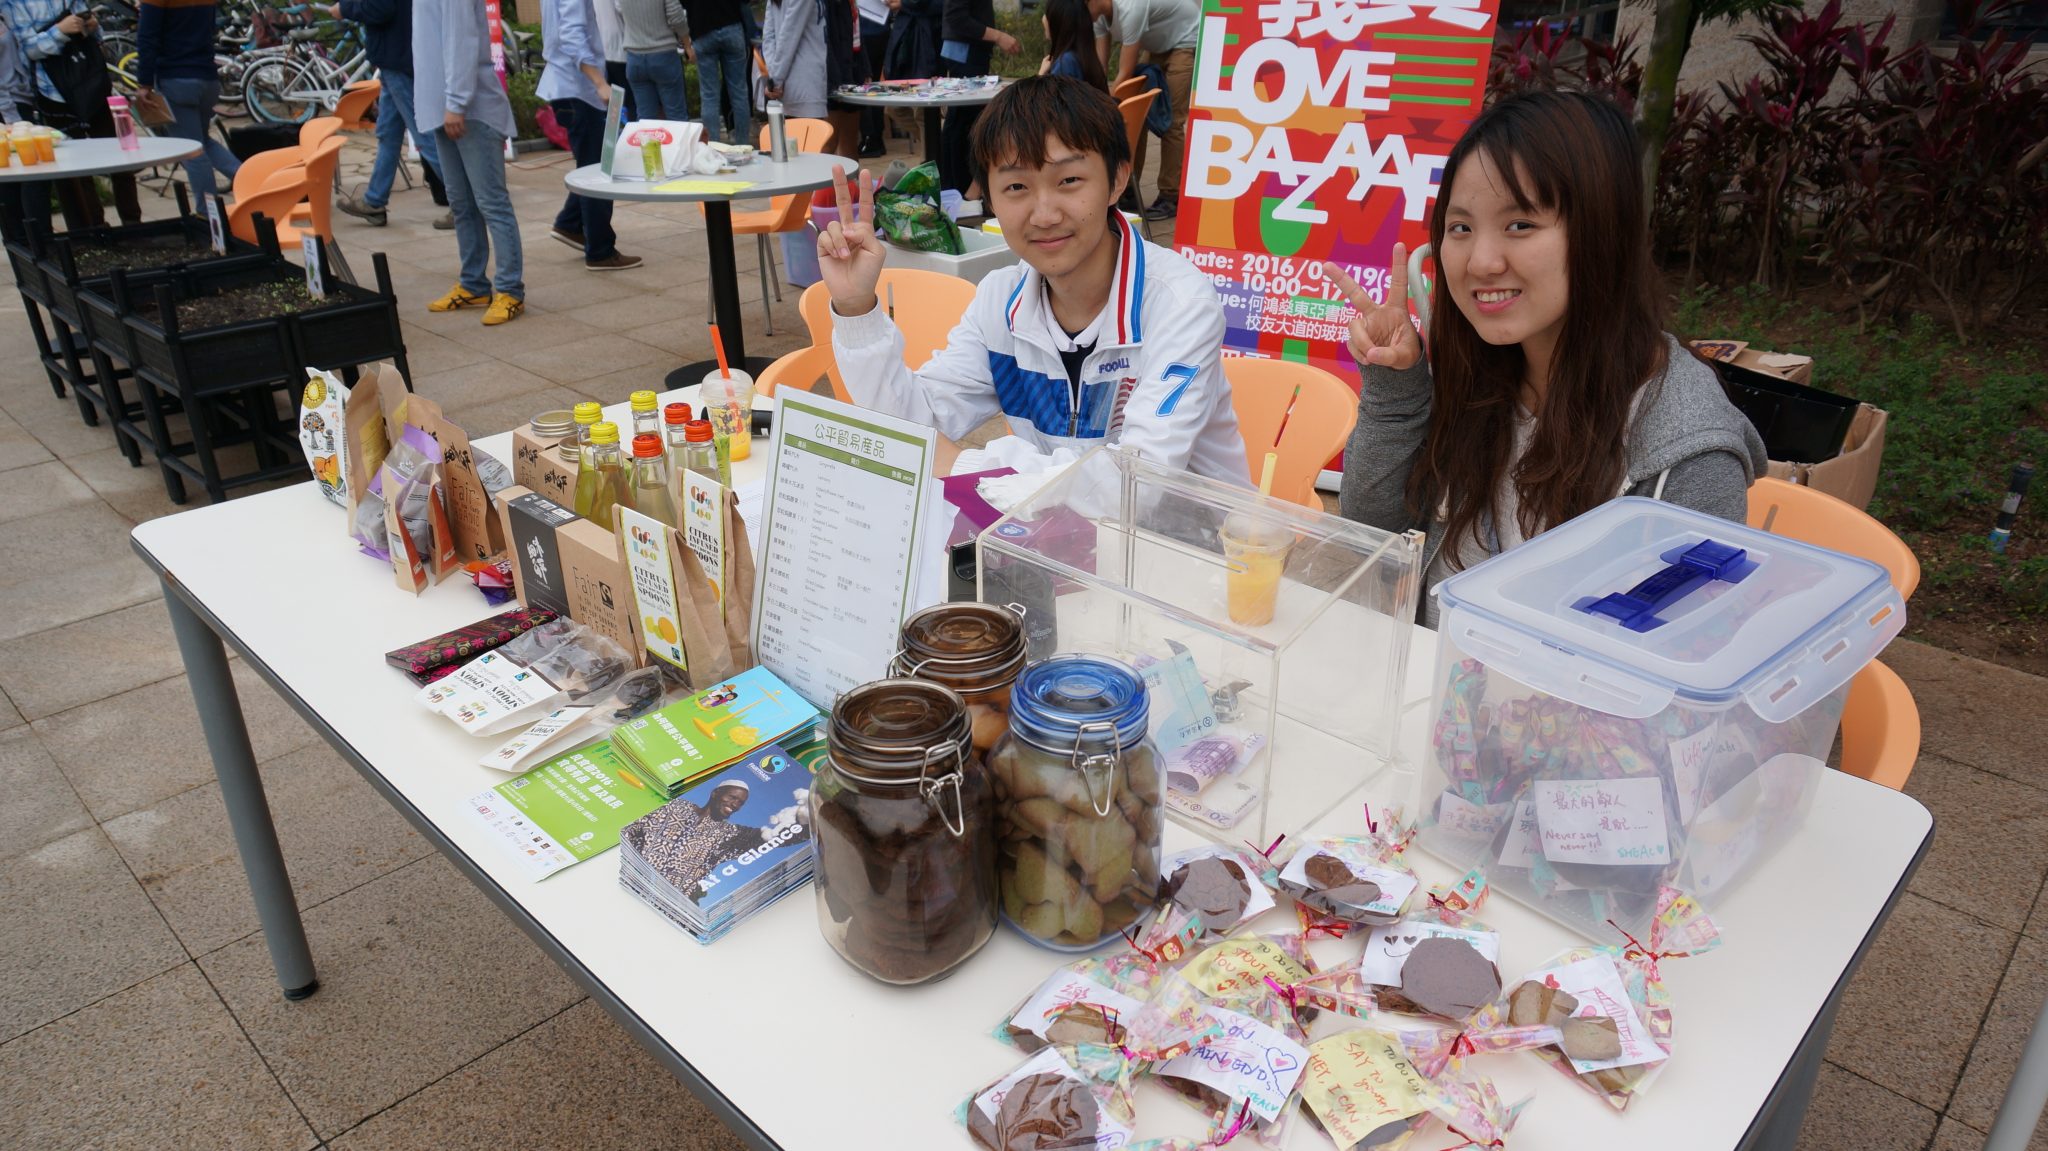 Fair Trade and Homemade Cookie Booth 公平貿易和曲奇攤位